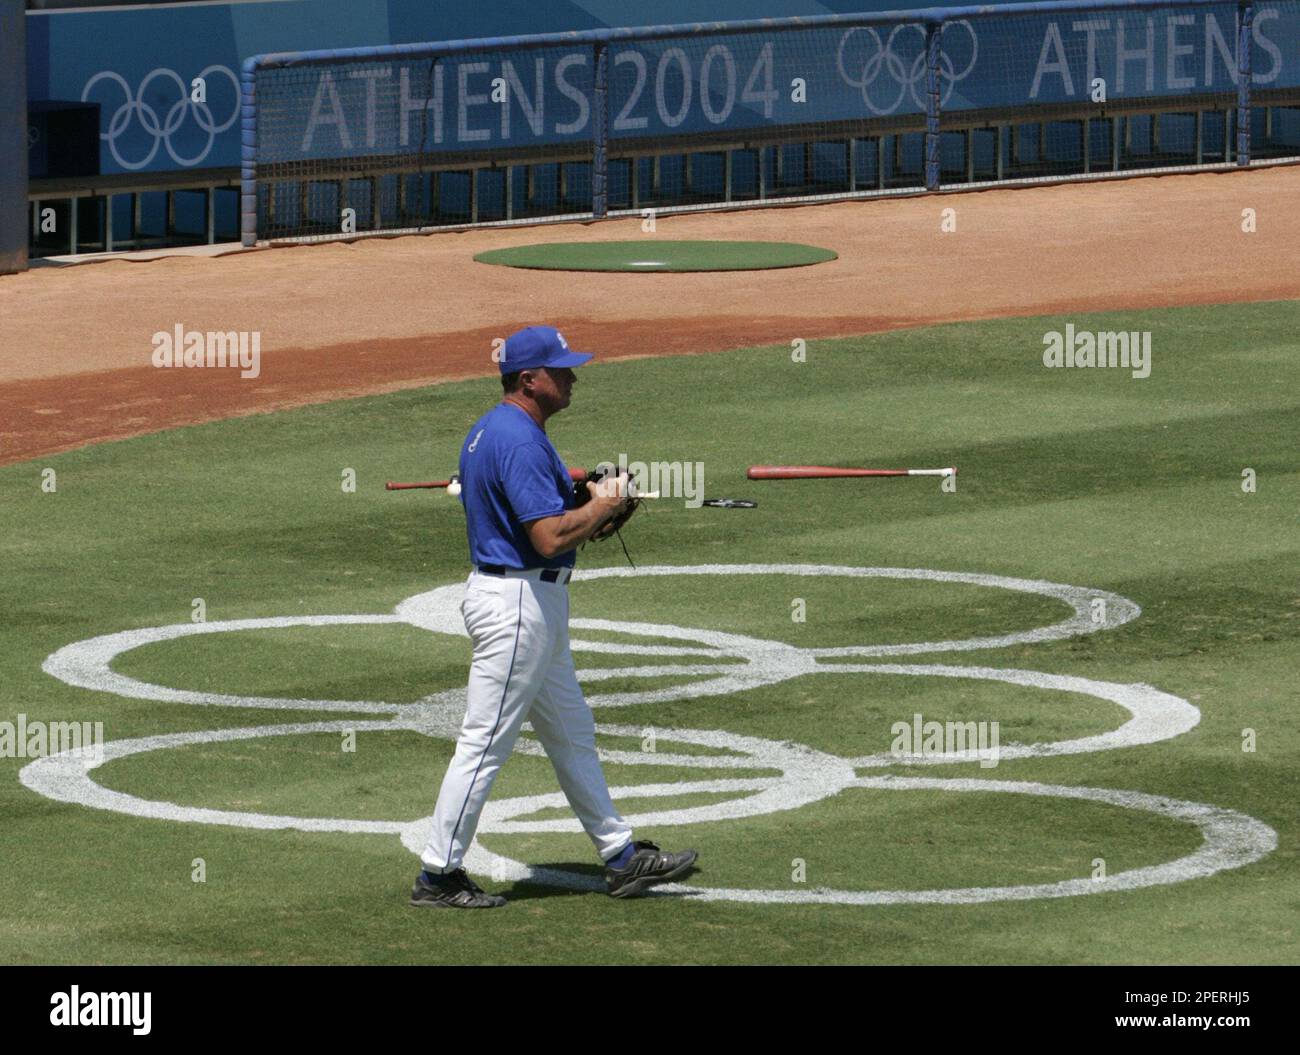 Dusty Rhodes, from Florida, manager of the Greek baseball team, walks onto the field during practice, Saturday, Aug. 2004, at the Olympic baseball center in Athens, Greece. (AP Behrman